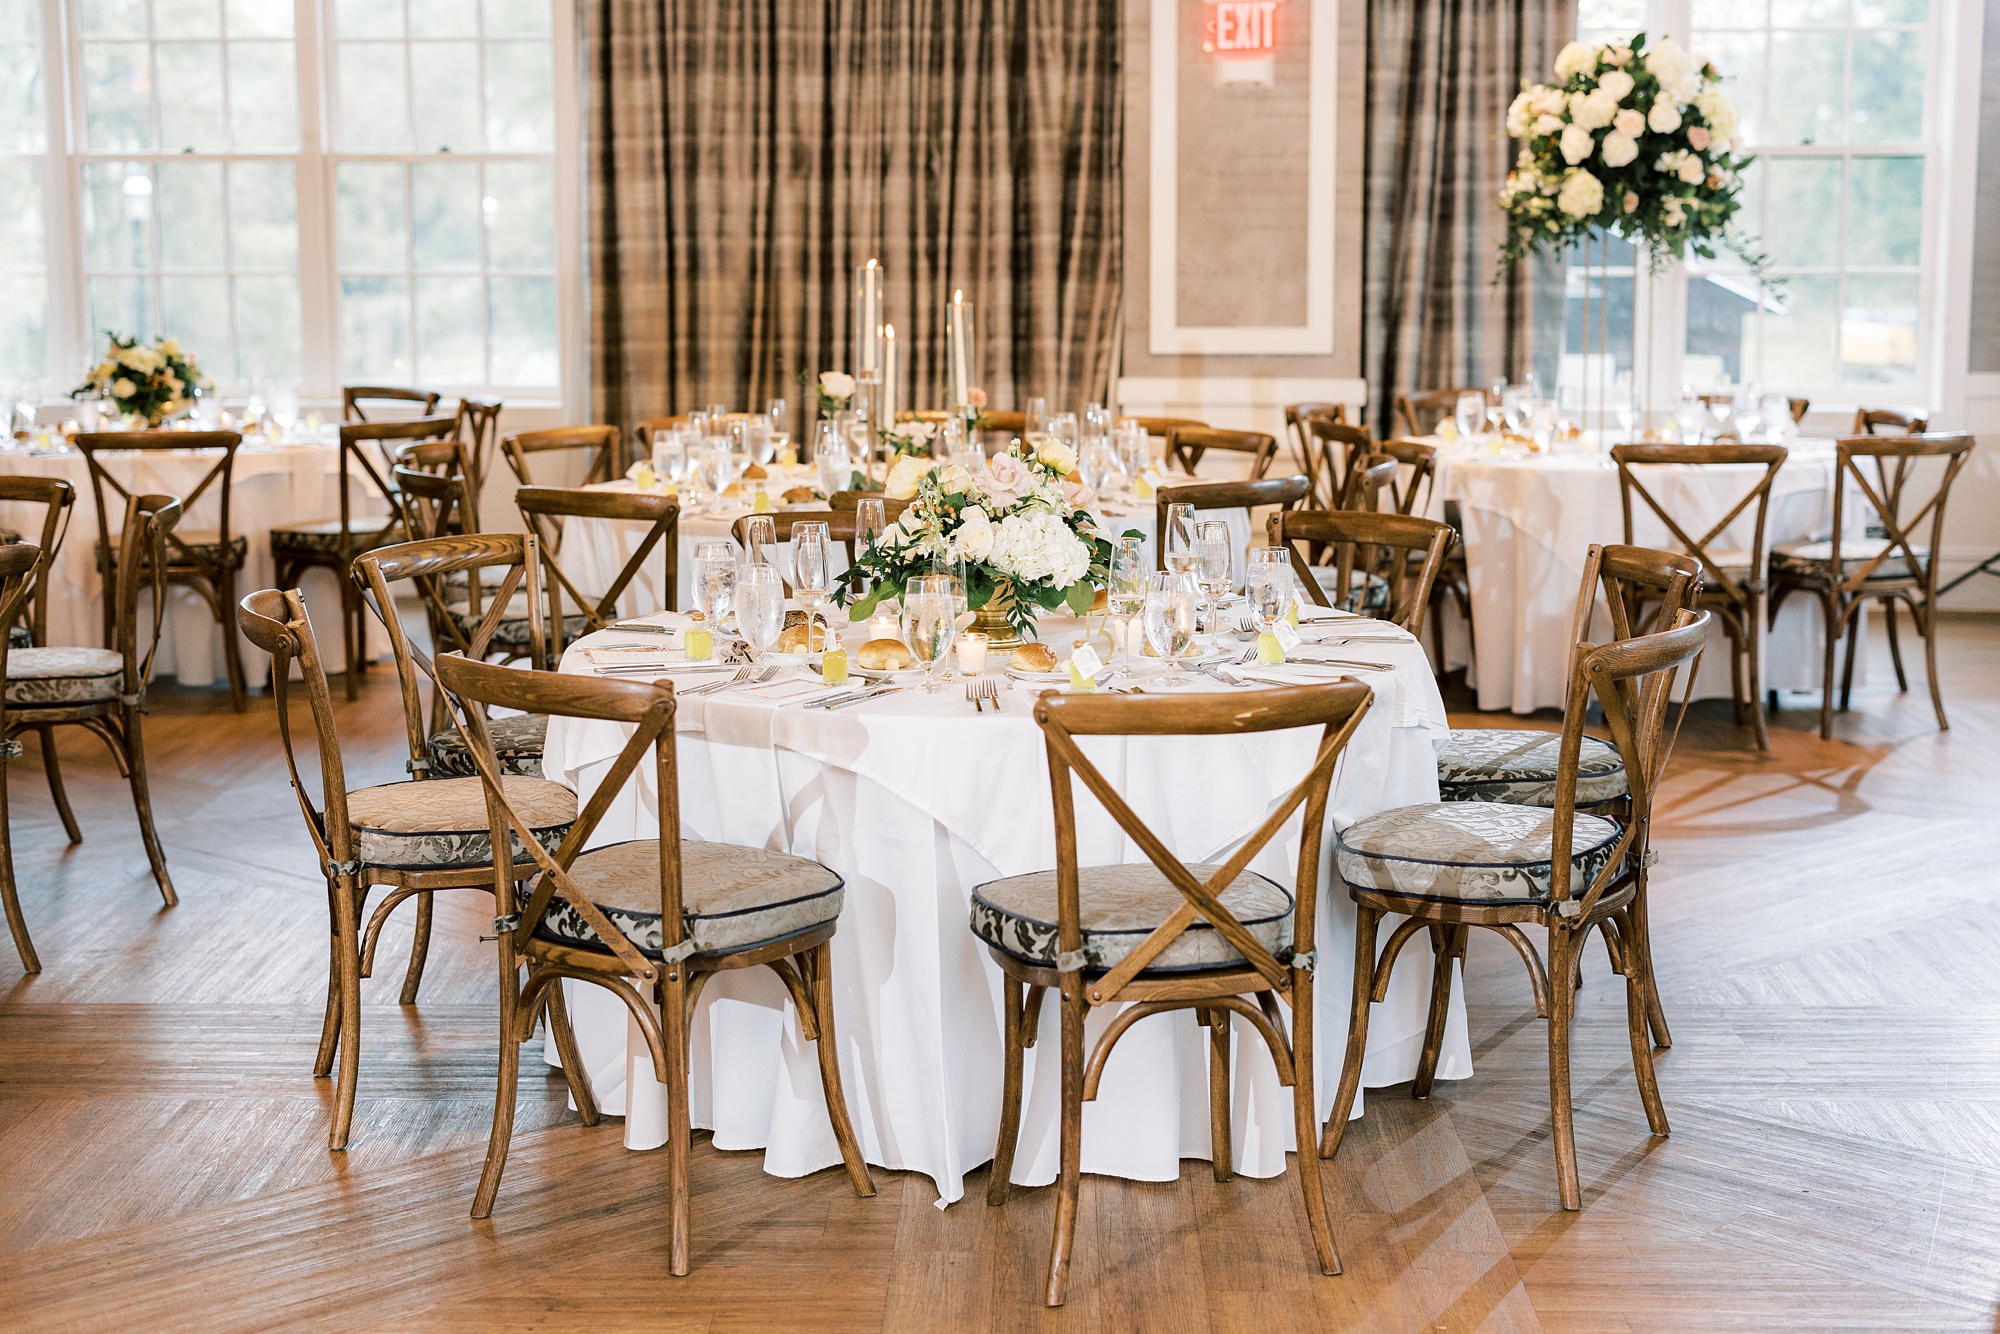 Italian inspired wedding reception at The River House at Odette's with wooden chairs and citrus inspired centerpieces 